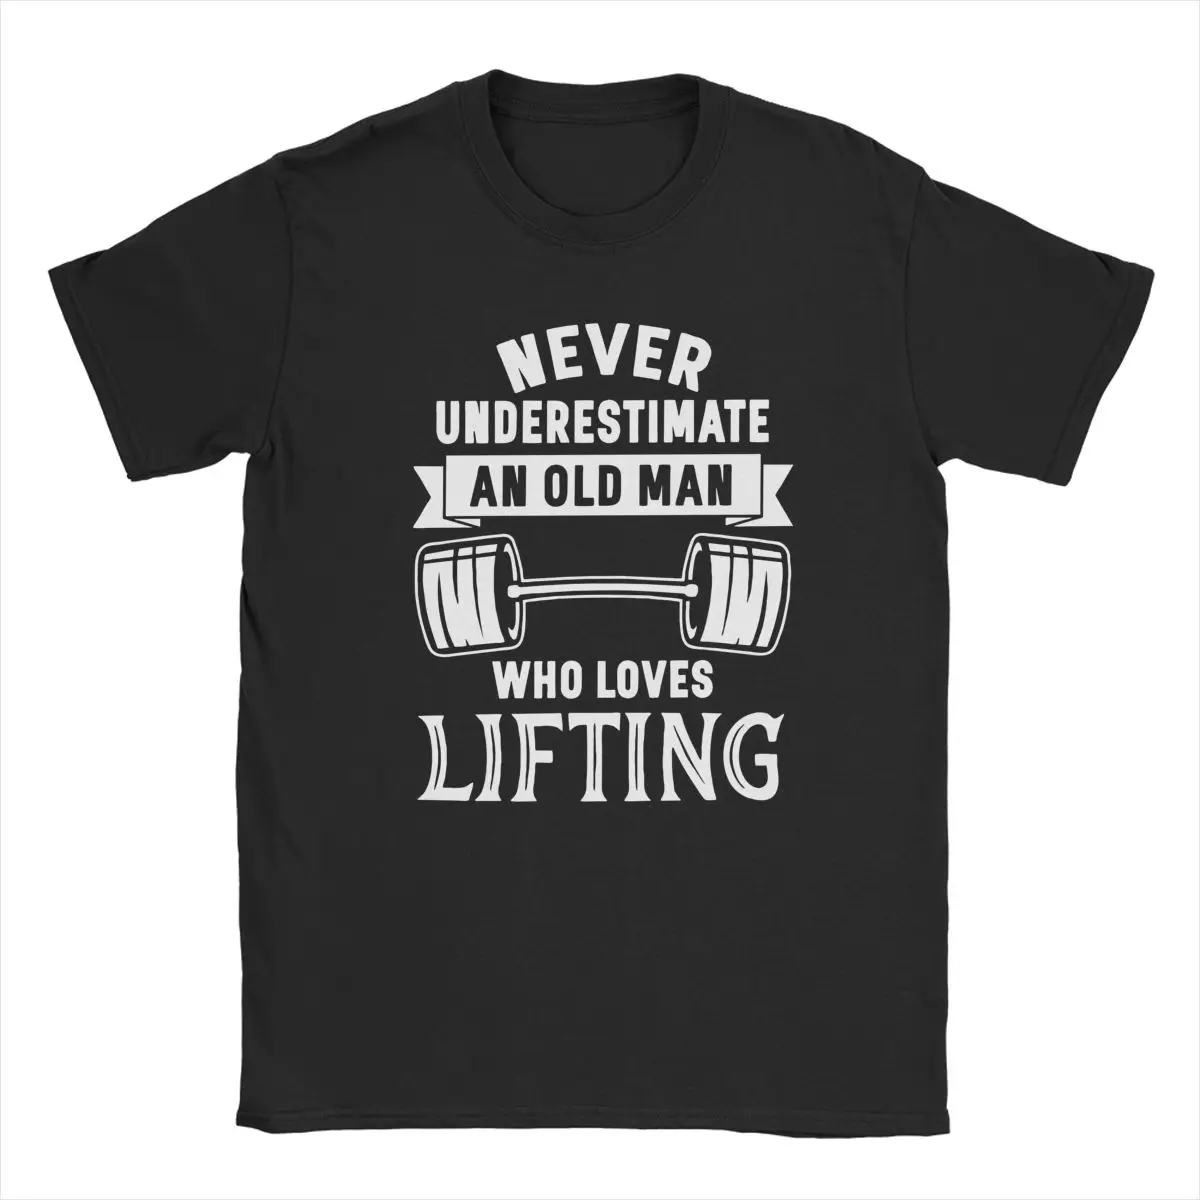 

Old Man Weightlifter Weightlifting Men's T Shirts Awesome Tee Shirt Short Sleeve O Neck T-Shirts Pure Cotton Gift Idea Clothes